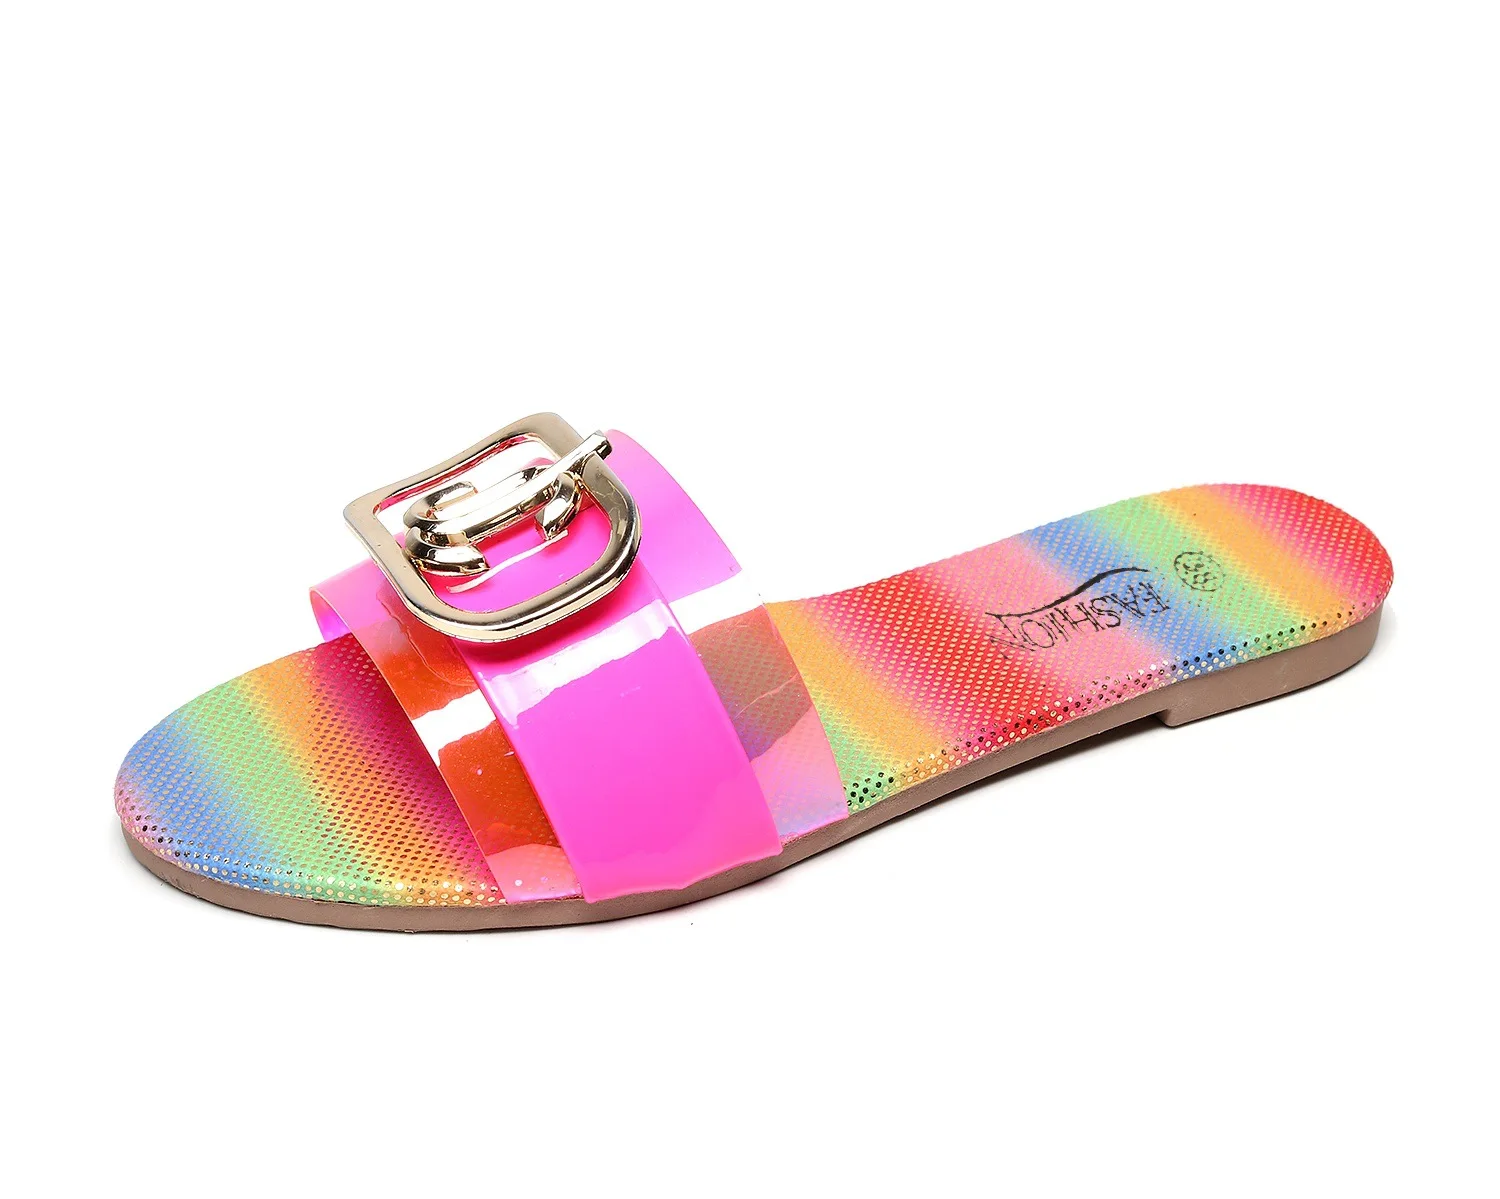 

SD-28 Beautiful sequined rainbow PU leather sole & transparent PVC cross strap open toe beach slipper women summer flat sandals, Picture show , squine colors